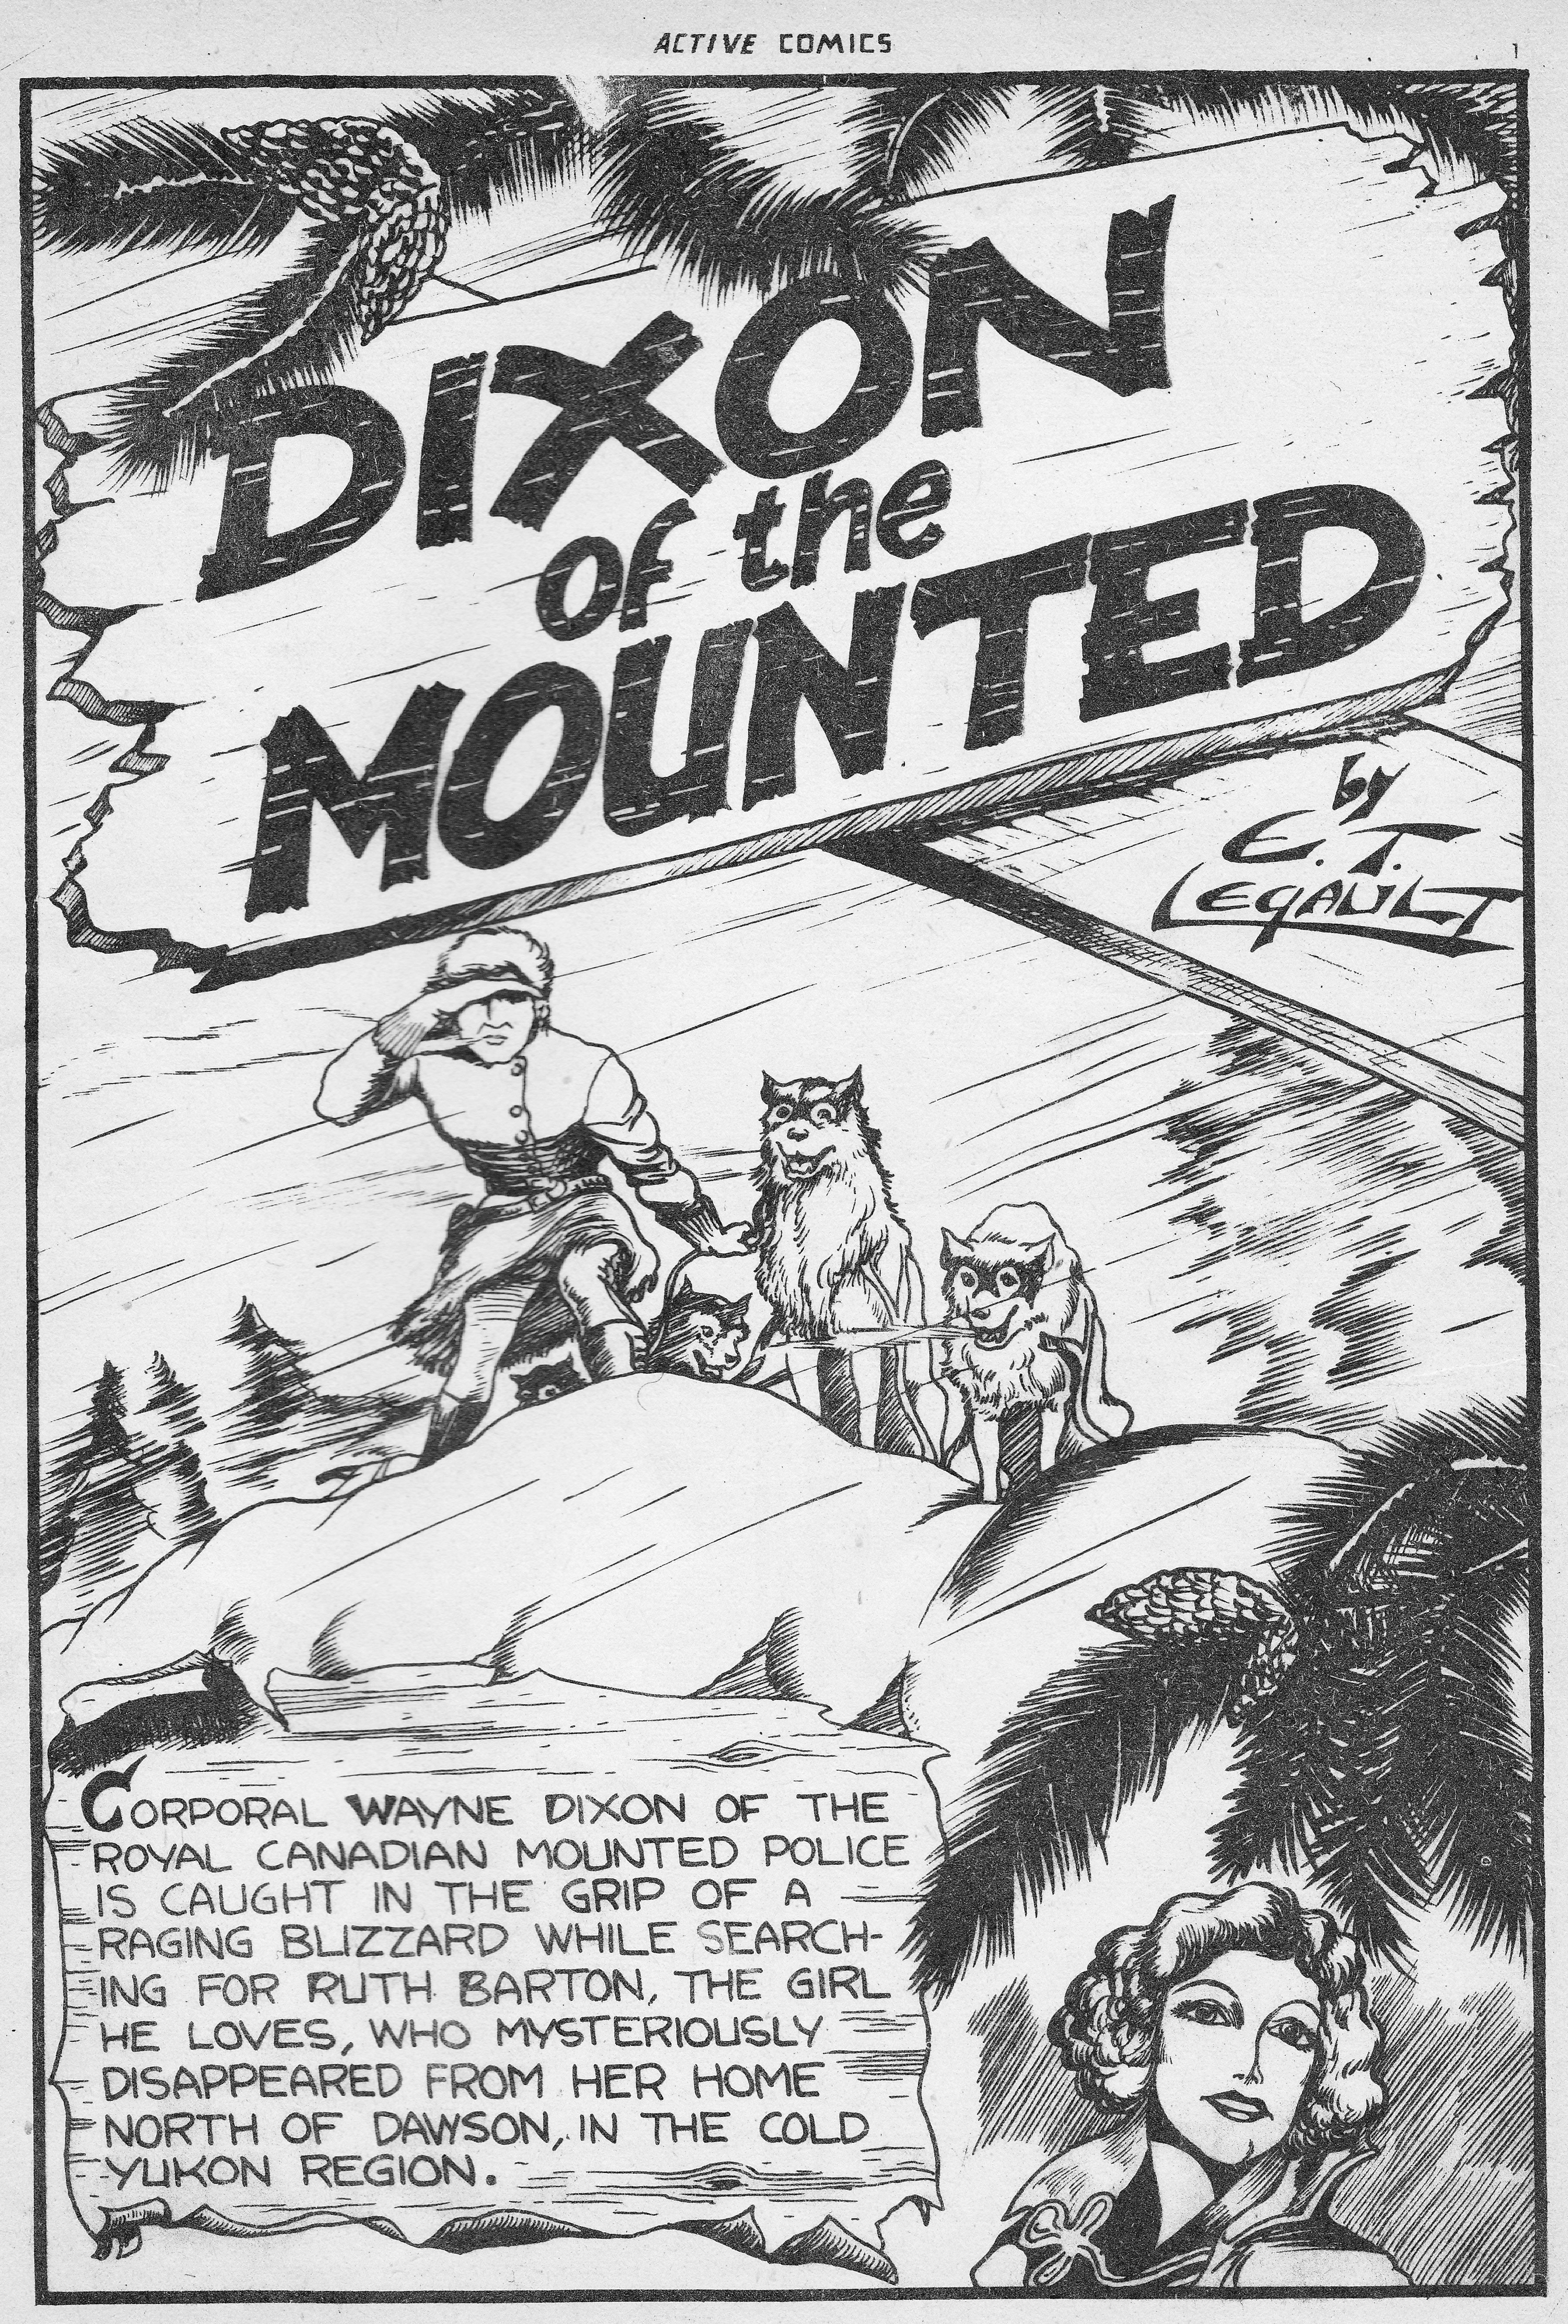 C:\Users\Robert\Documents\CARTOONING ILLUSTRATION ANIMATION\IMAGE CARTOON\IMAGE CARTOON D\DIXON OF THE MOUNTED, Active, 1, 1.jpg